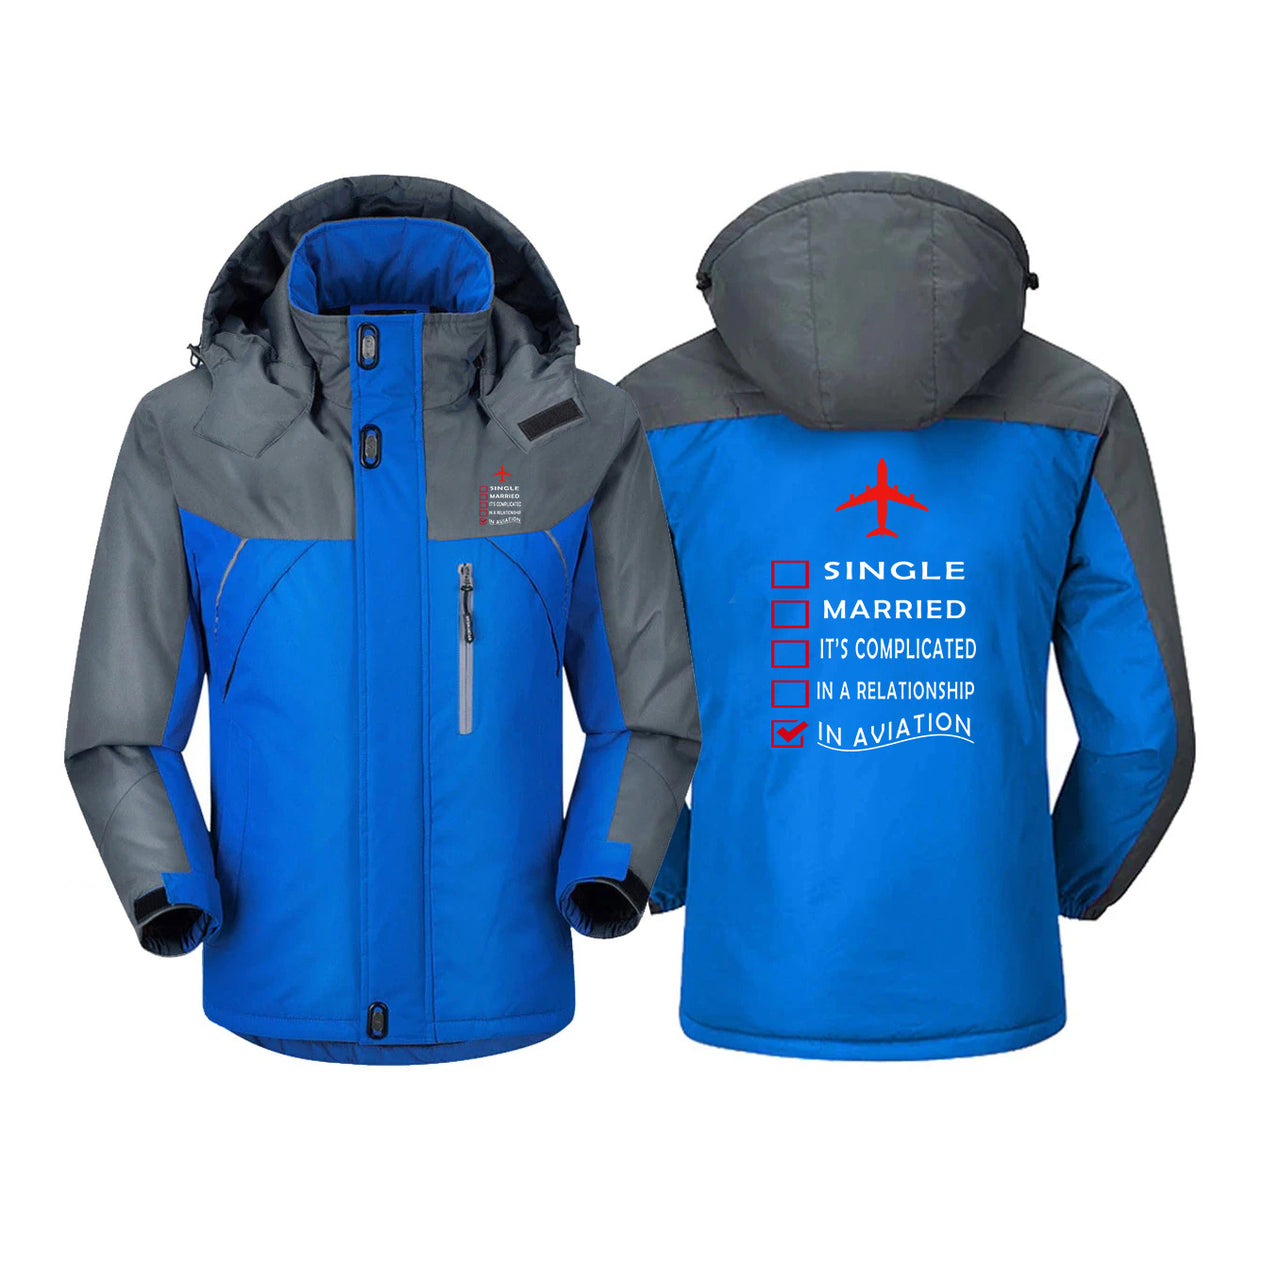 In Aviation Designed Thick Winter Jackets